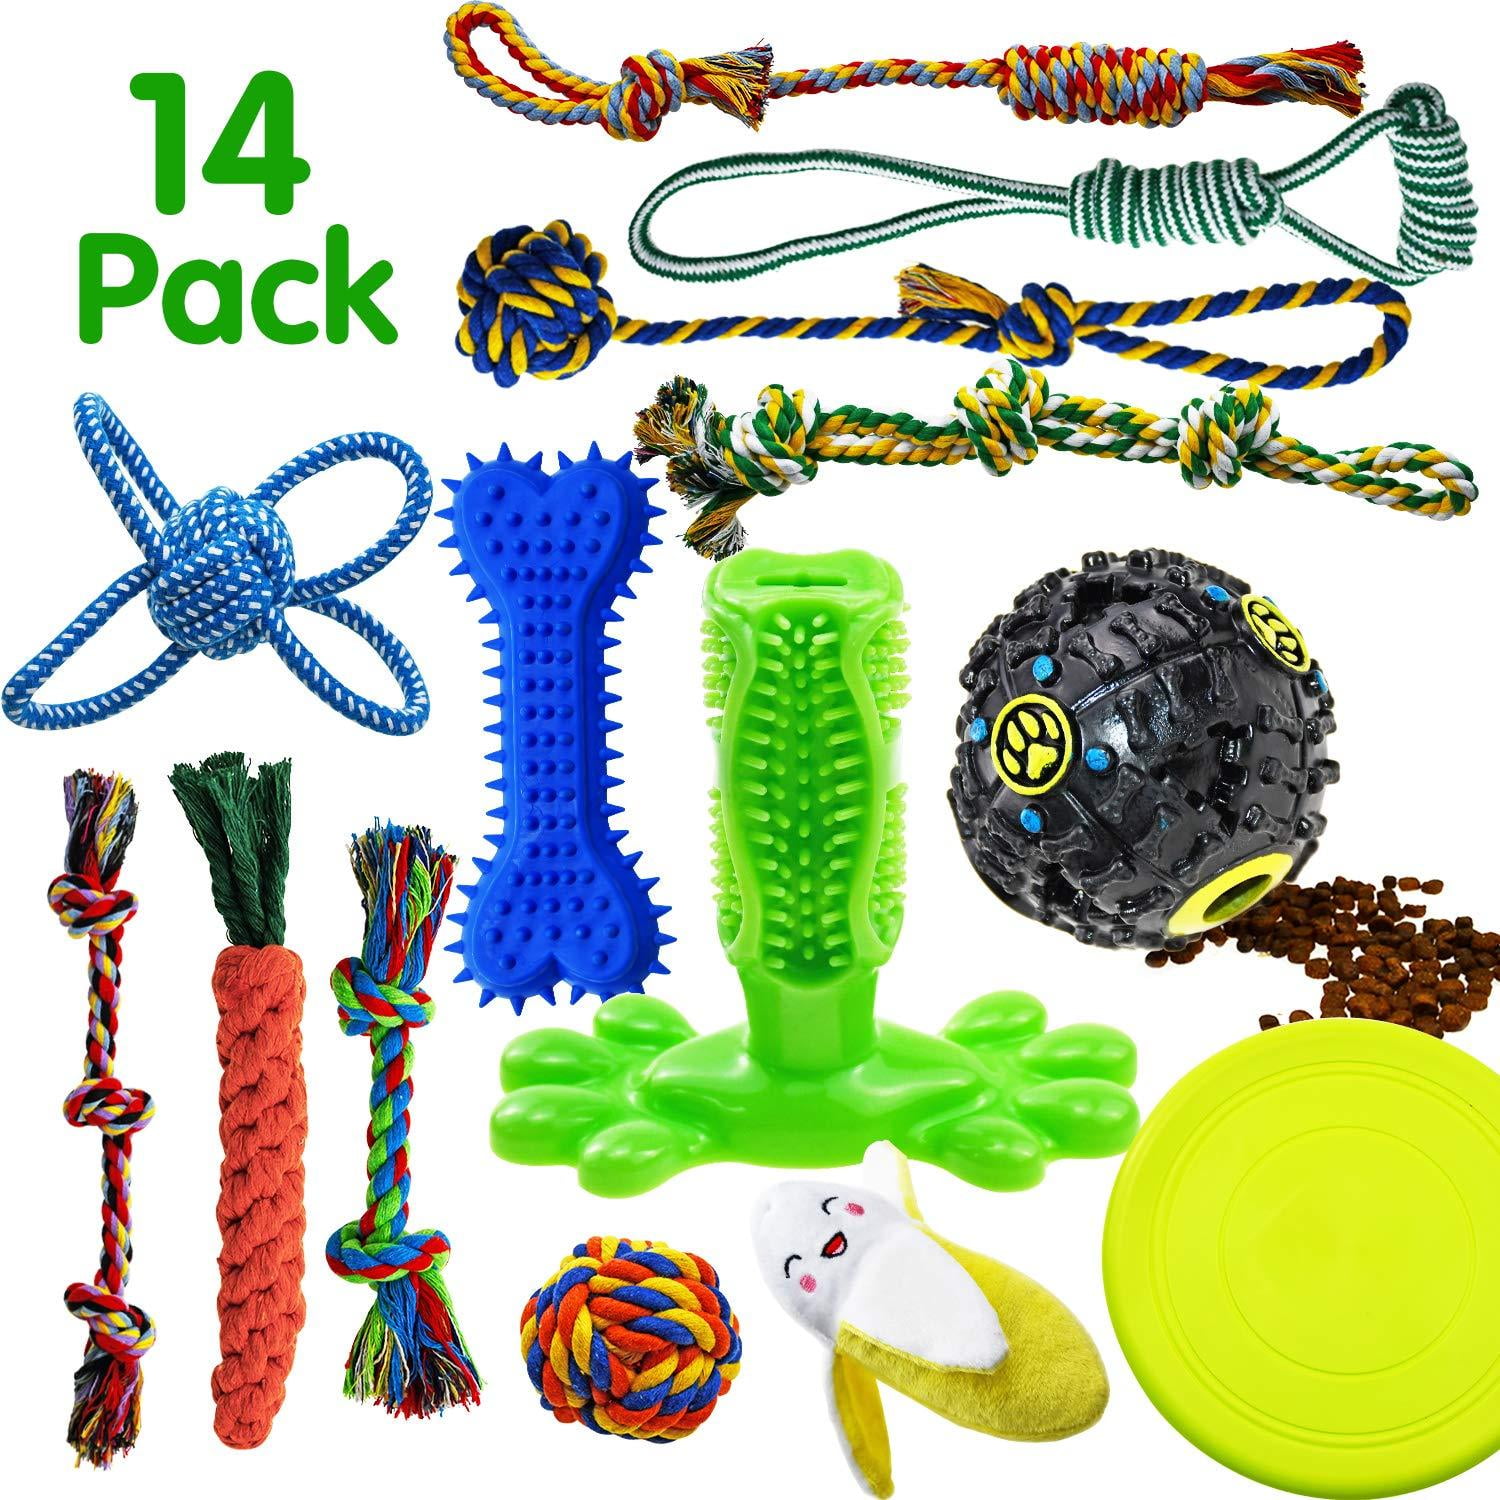 Tough Puppy Teething Toys SenYoung Dog Toys Cute and Soft Plush Interactive Washable Pet Toys for Small and Medium-Sized Dog Rope and Flying Ring Puppy Chew Toys 7 Pack Dog Squeaky Toys Sets